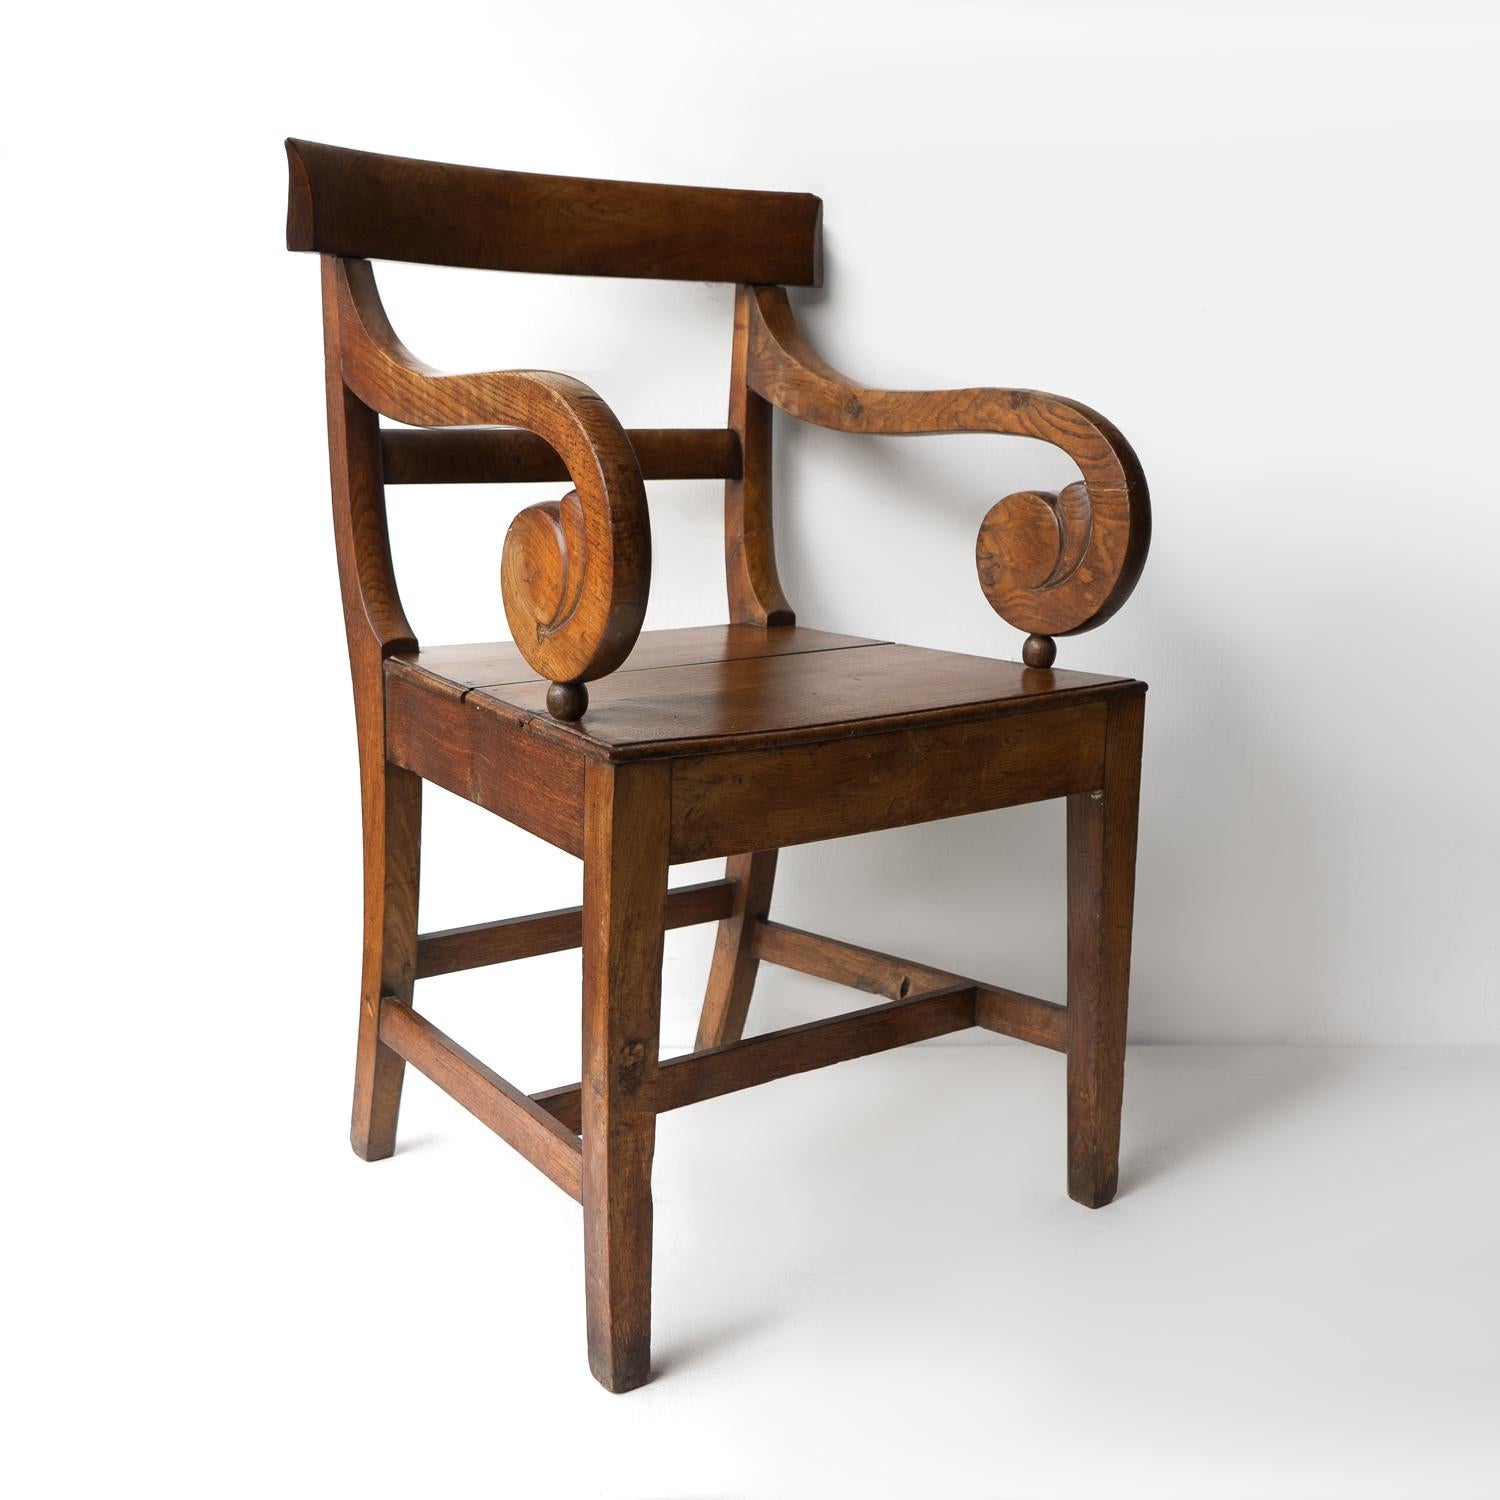 British Antique Regency Oak Scroll Armchair, Early 19th Century Elbow Chair For Sale